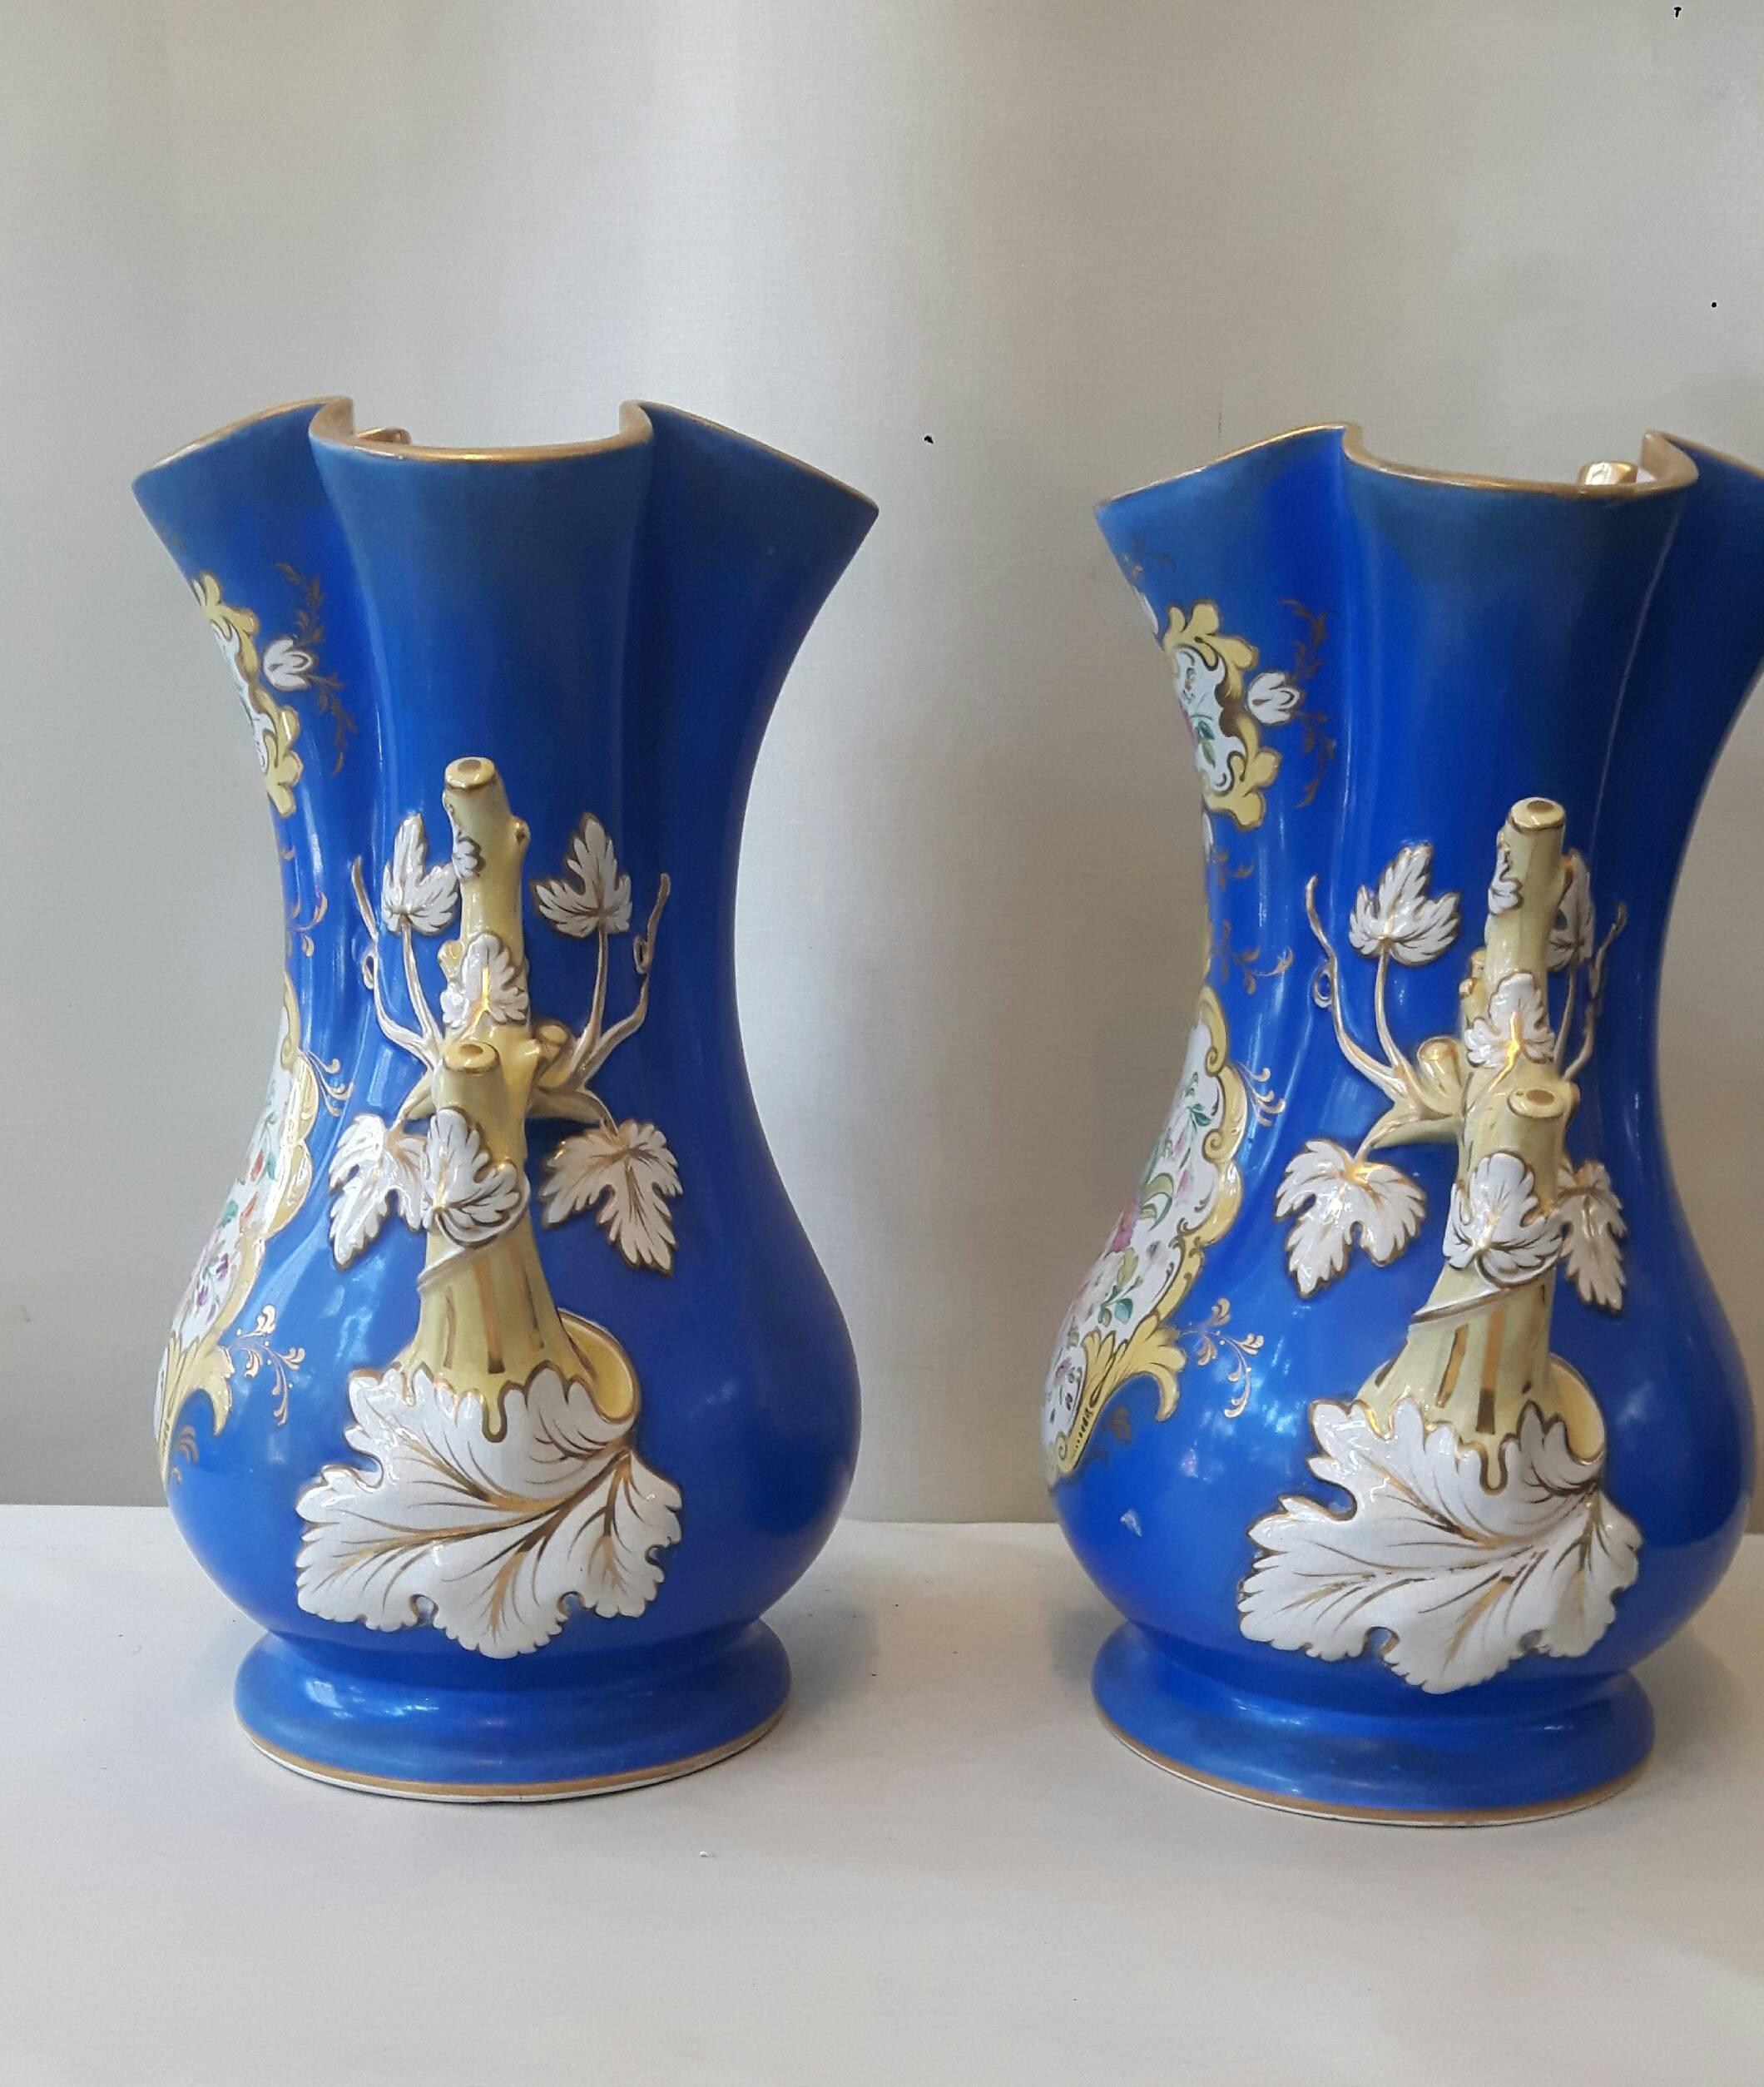 Glazed 19th Century Pair of Decorative English Vases For Sale